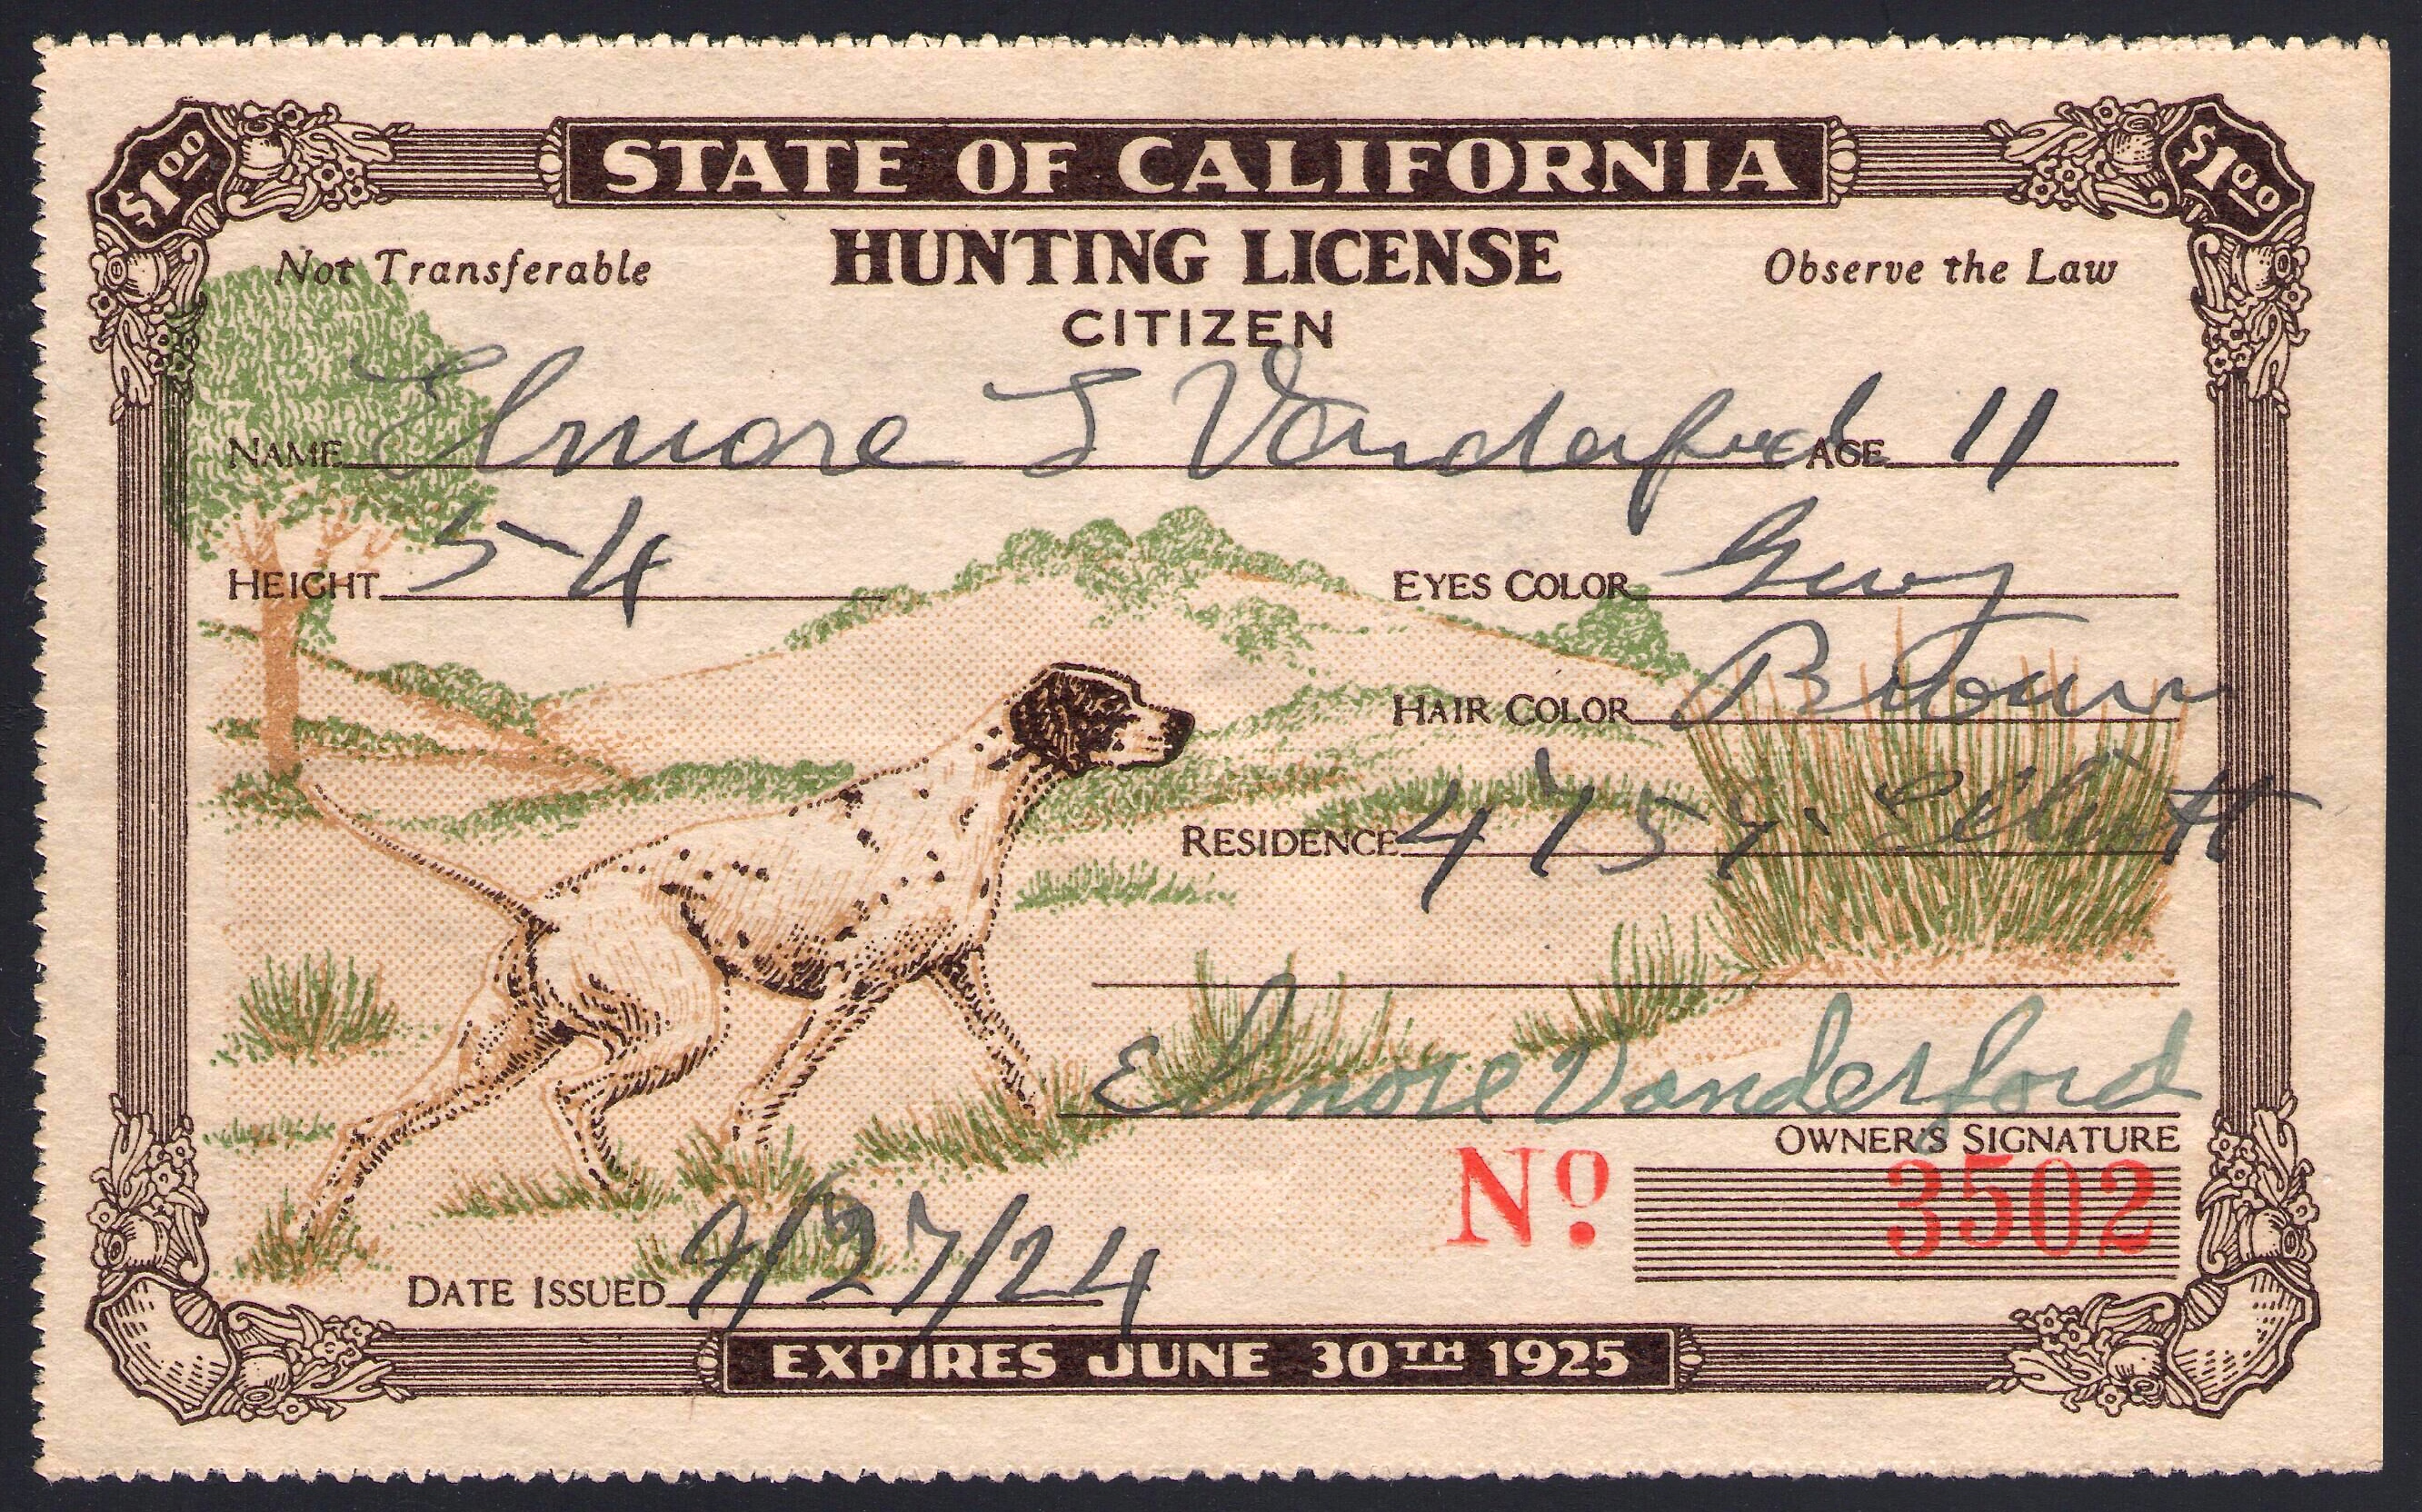 E.L. Vanderford's Second Hunting License – Age 11 